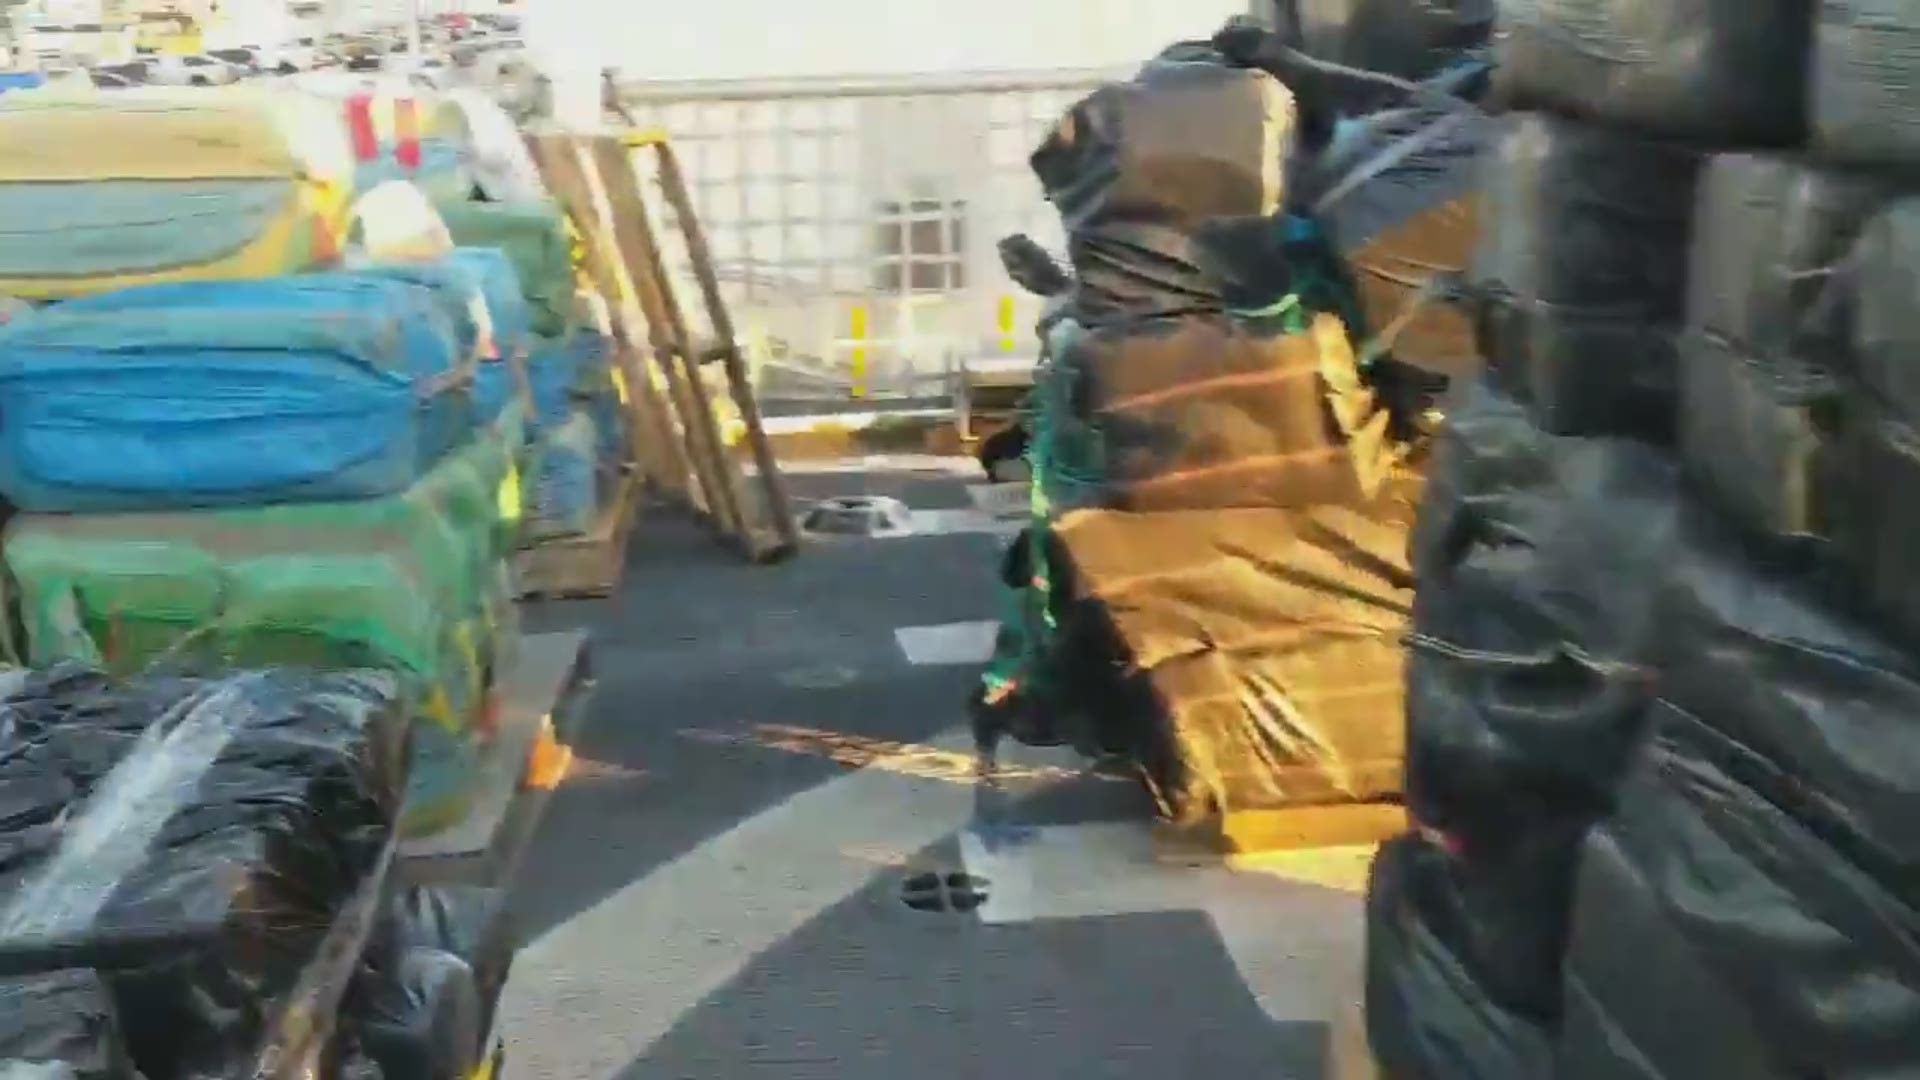 The US Coast Guard's 7th District shared video of the 27,000 pounds of seized cocaine that will be offloaded Friday and sent for destruction.